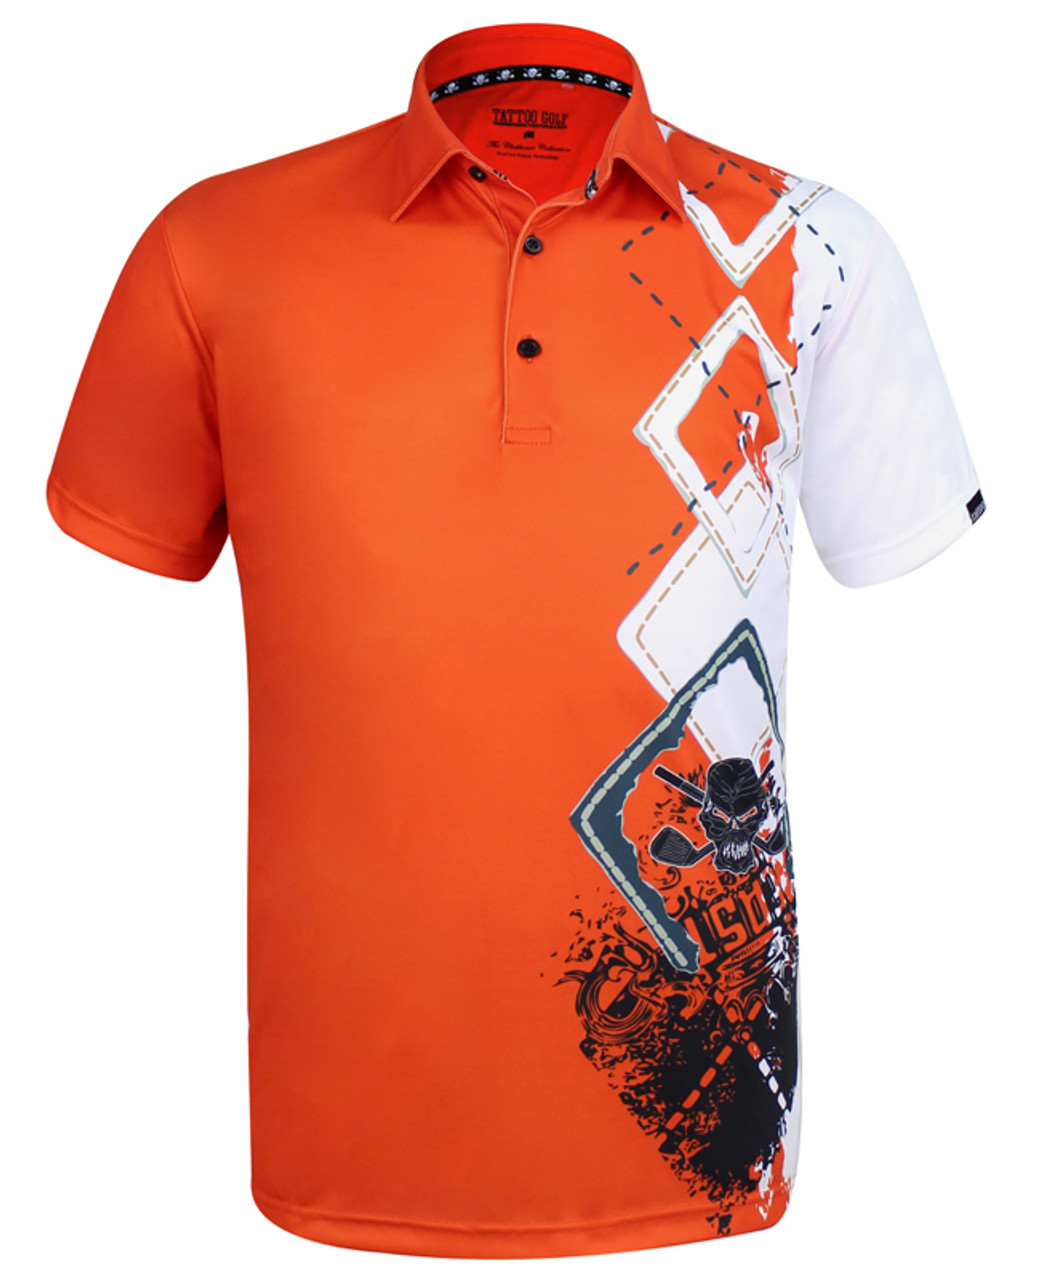 Men's golf shirts In orange by Tattoo Golf. Comfortable fit